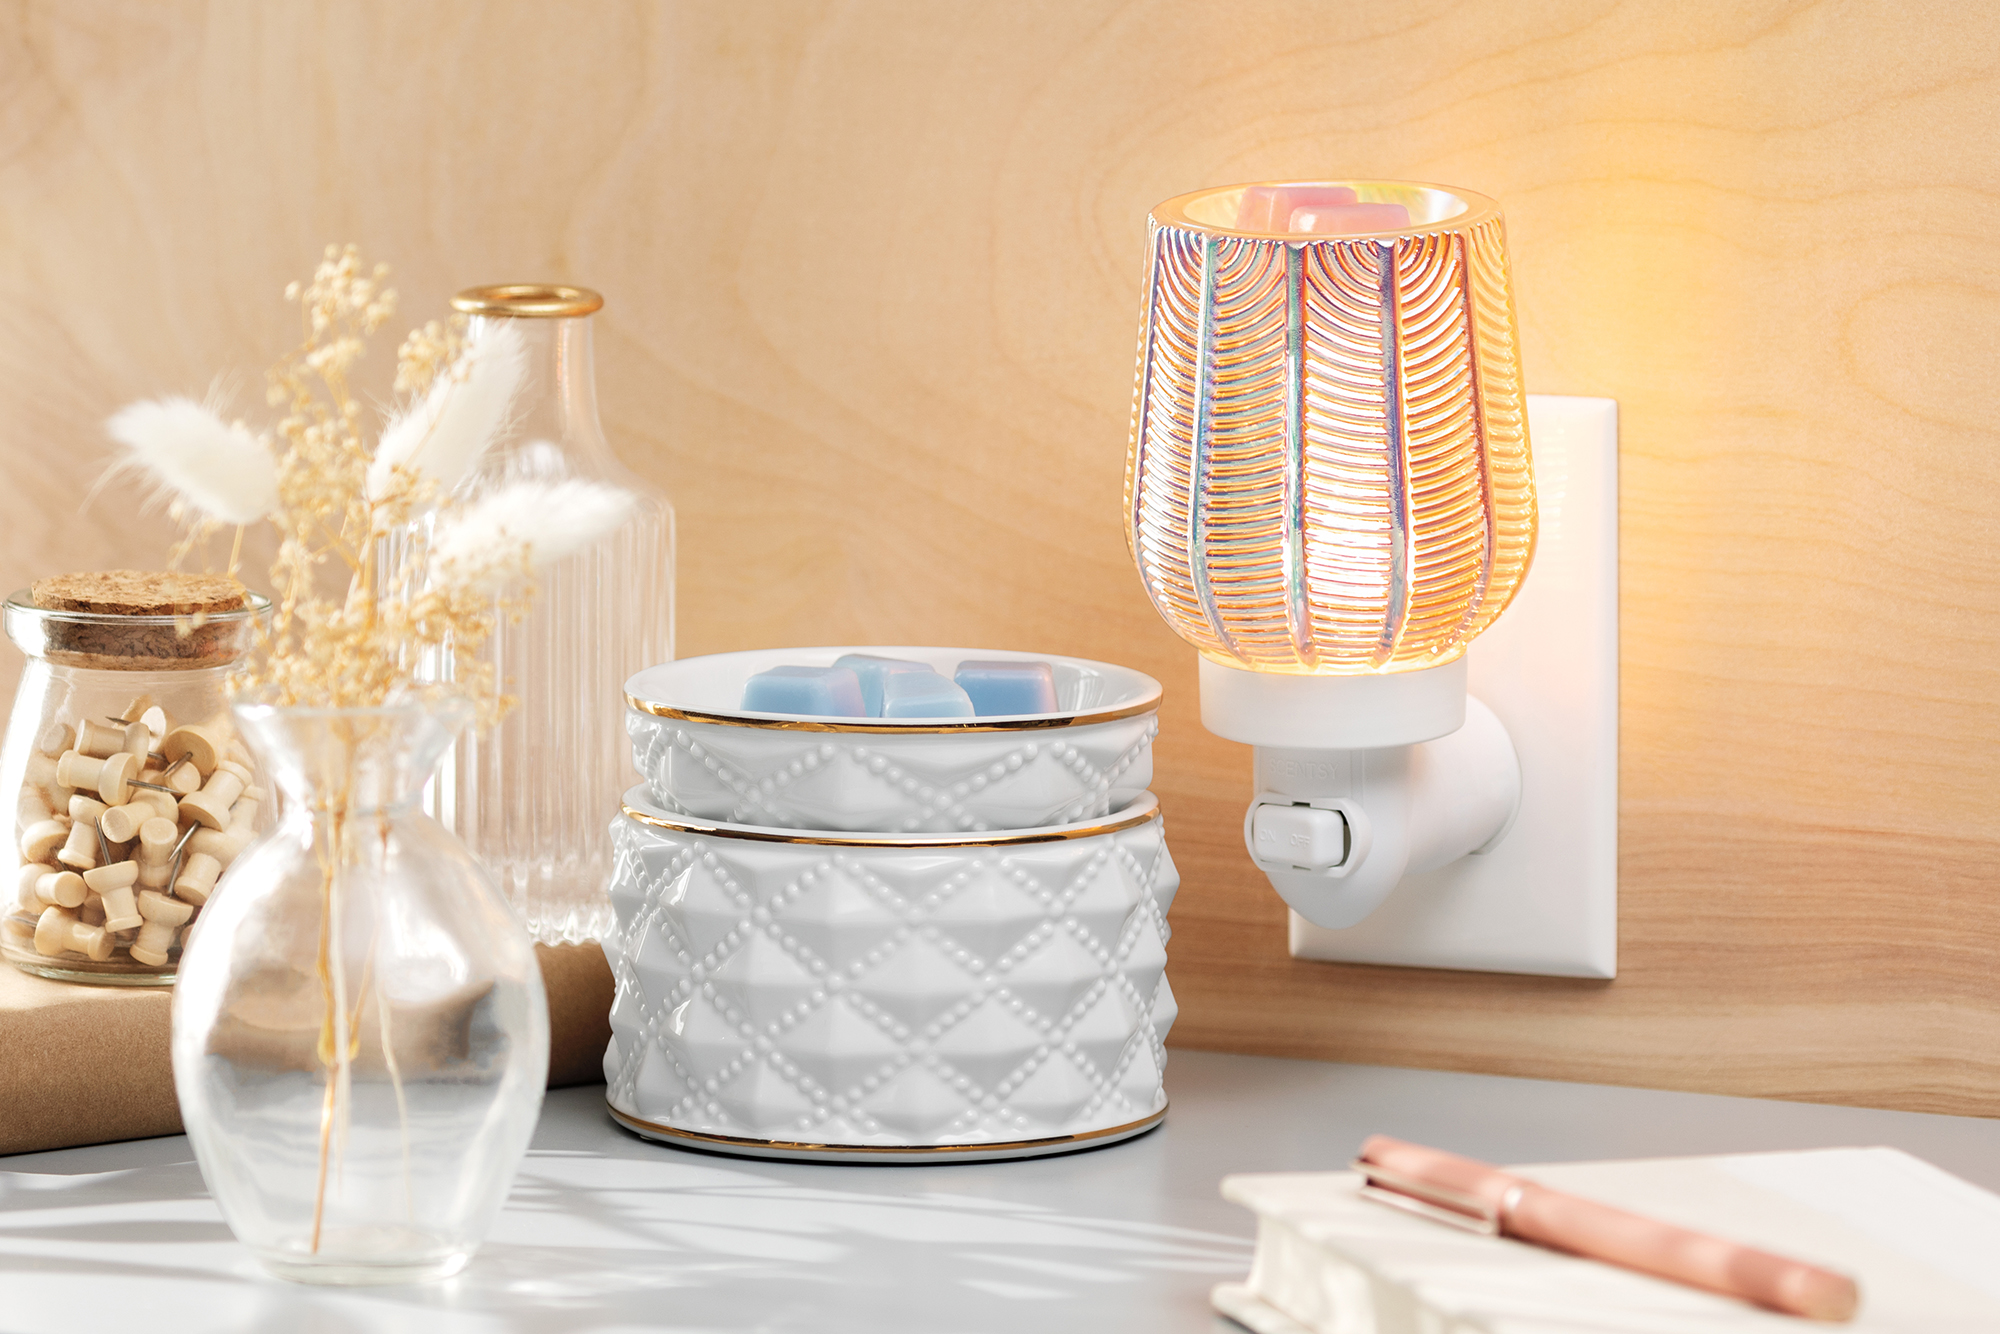 Scentsy's Pearled Gatsby Mini Warmer and Diamond Milk Glass Wax Warmer shining bright and providing the best home fragrance with our wax melts in your favorite scent